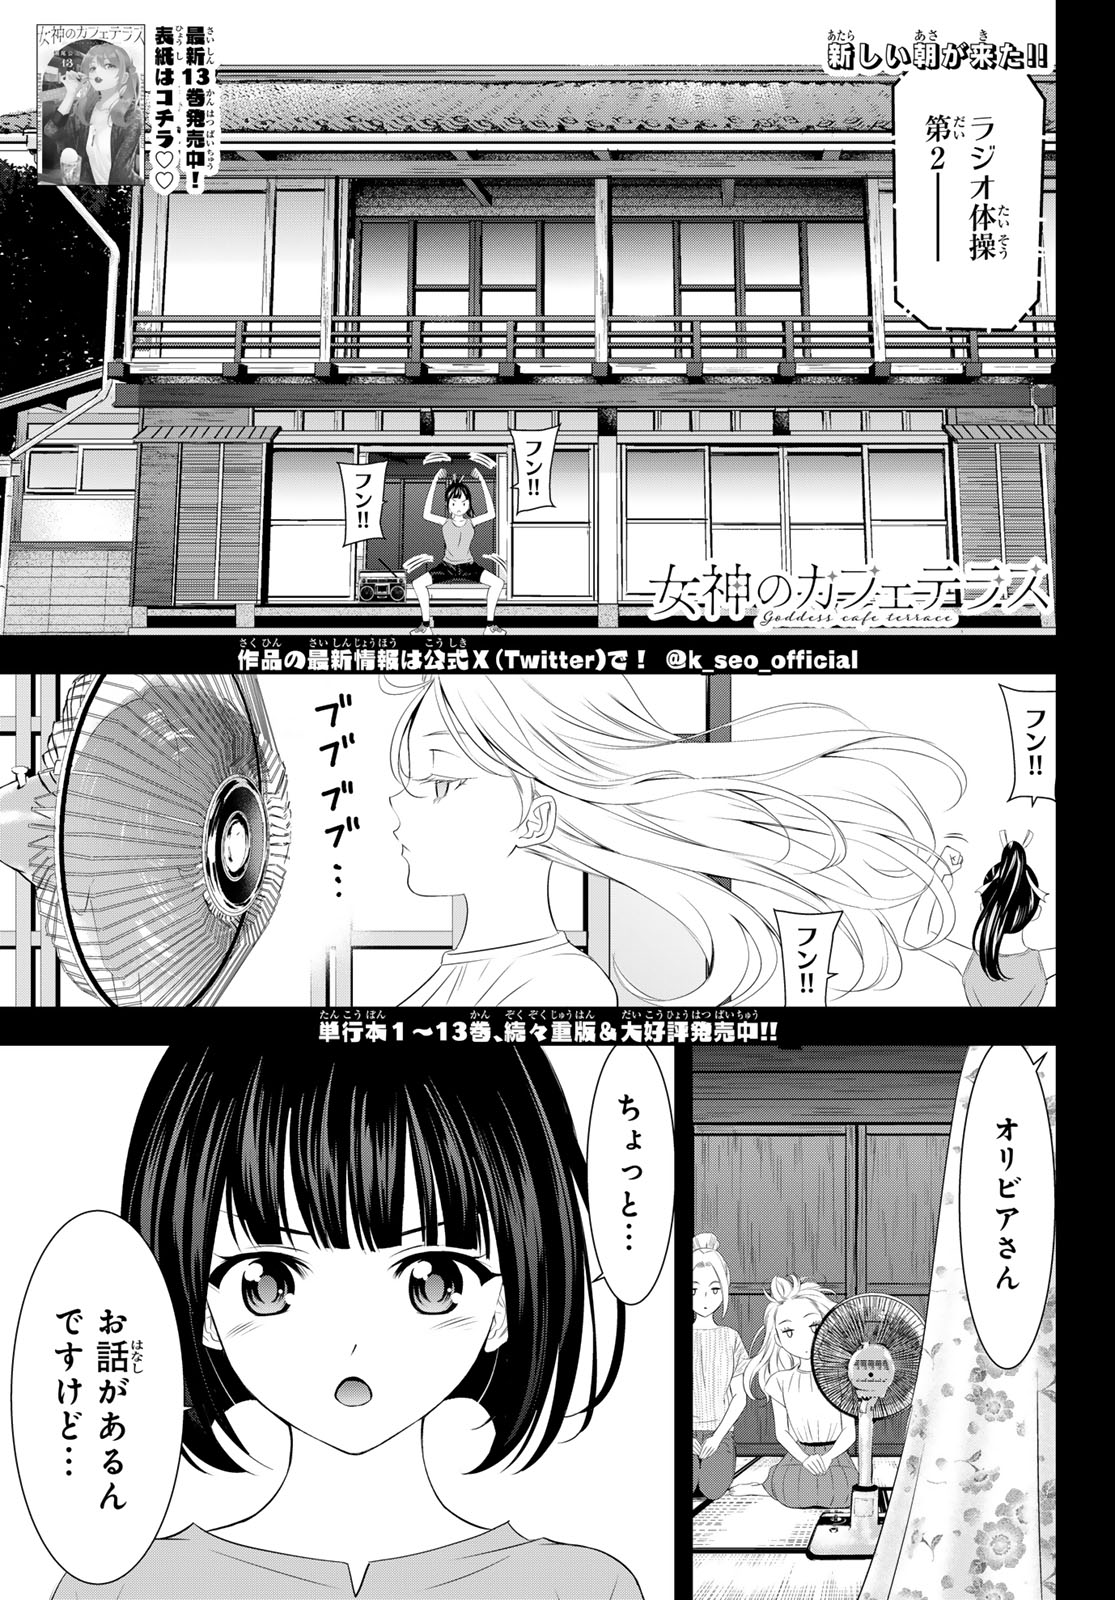 Megami no Cafe Terace - Chapter 139 - Page 1